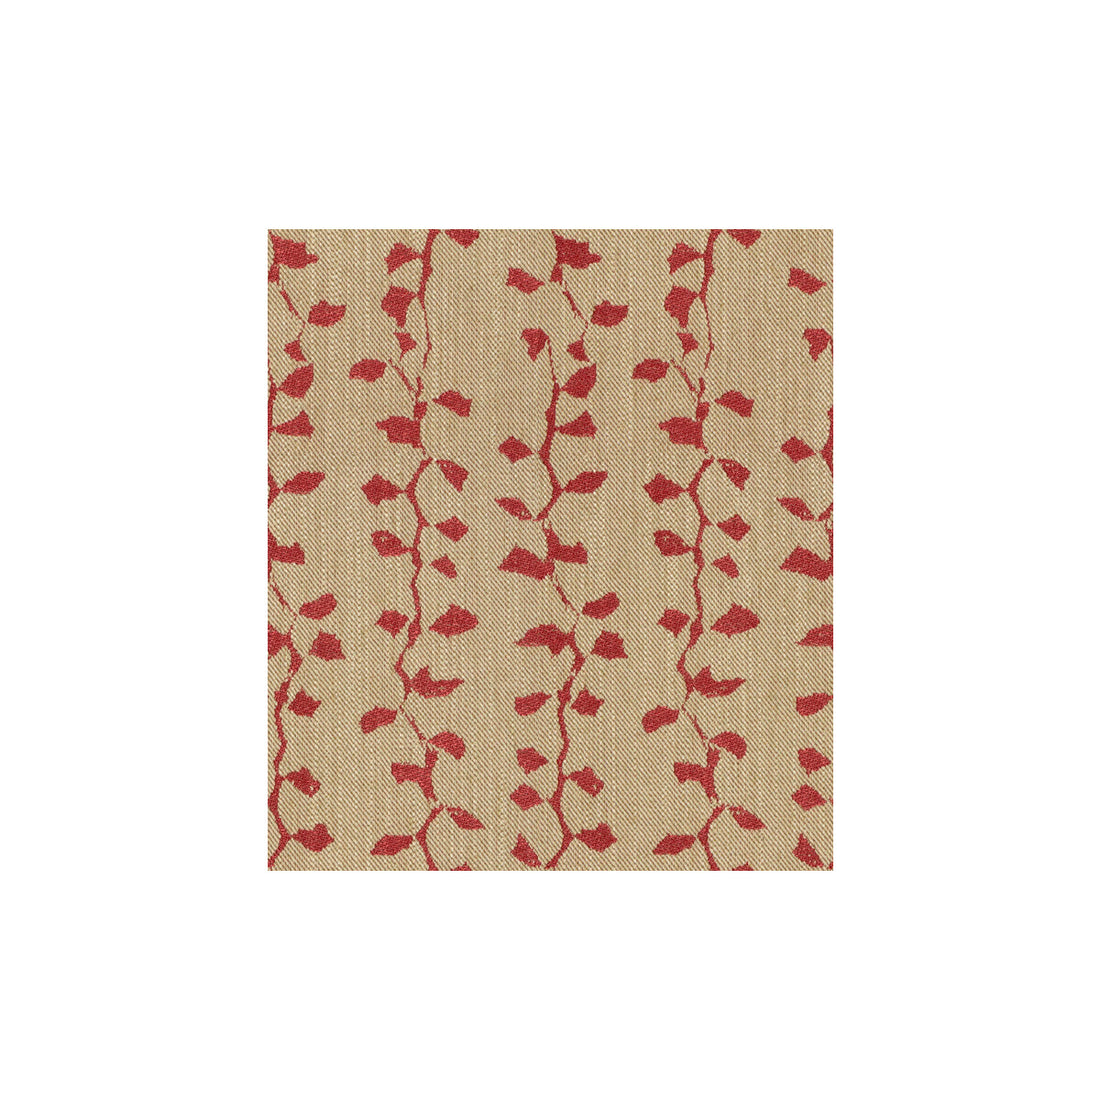 Jungle fabric in ruby color - pattern GWF-3203.19.0 - by Lee Jofa Modern in the Allegra Hicks Islands collection